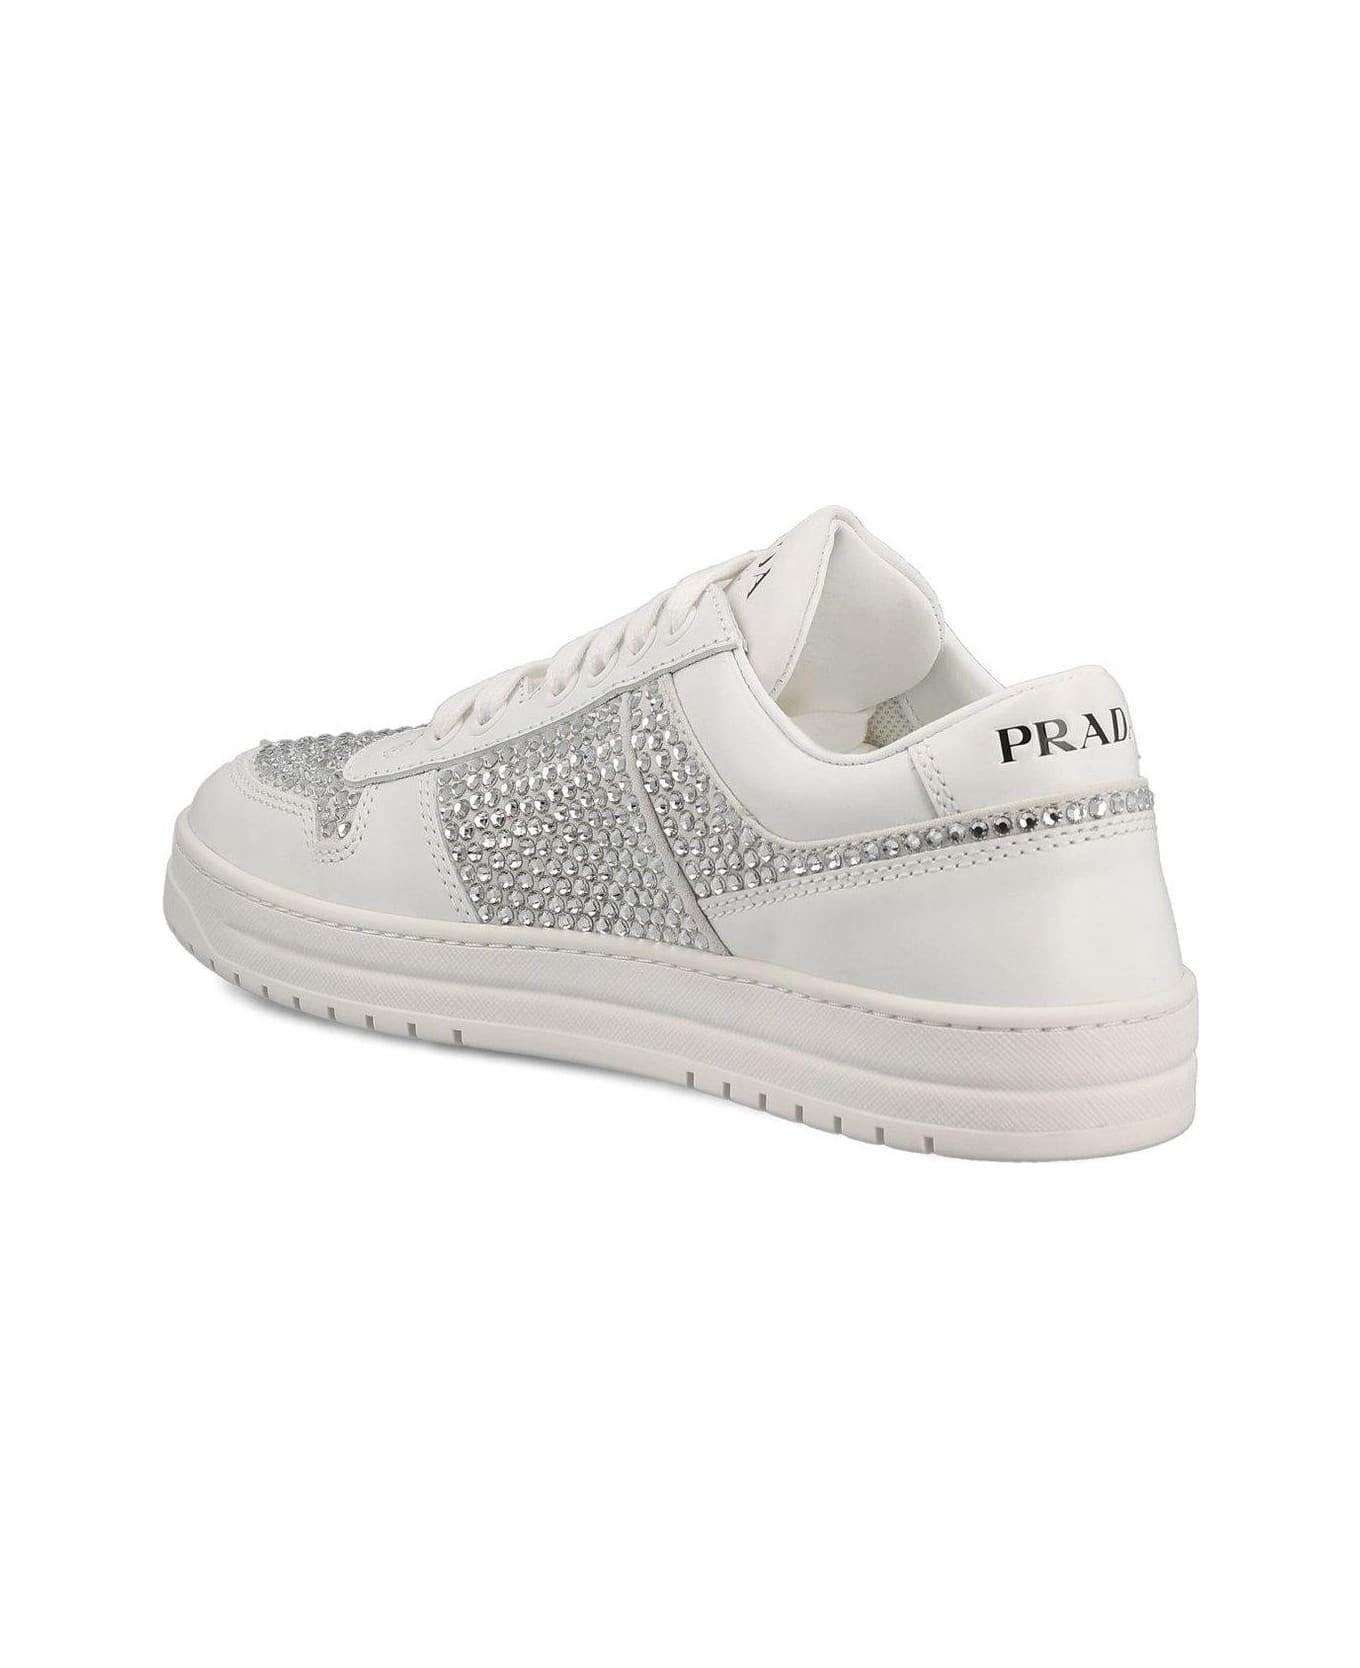 Prada Embellished Lace-up Sneakers - WHITE